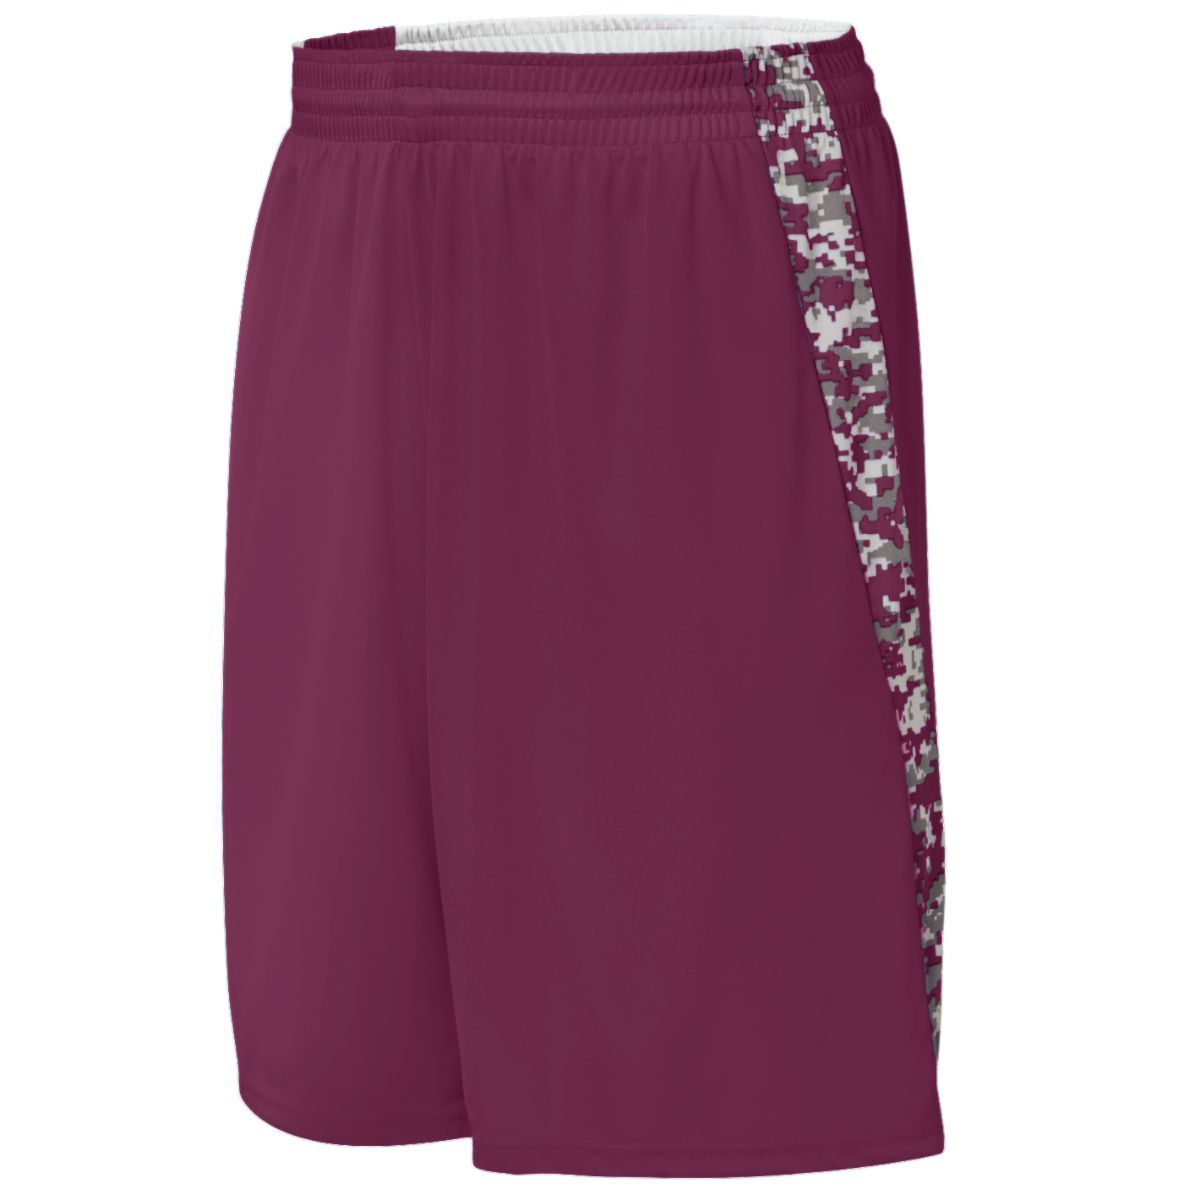 Augusta Sportswear Hook Shot Reversible Shorts in Maroon/Maroon Digi  -Part of the Adult, Adult-Shorts, Augusta-Products, Basketball, All-Sports, All-Sports-1 product lines at KanaleyCreations.com